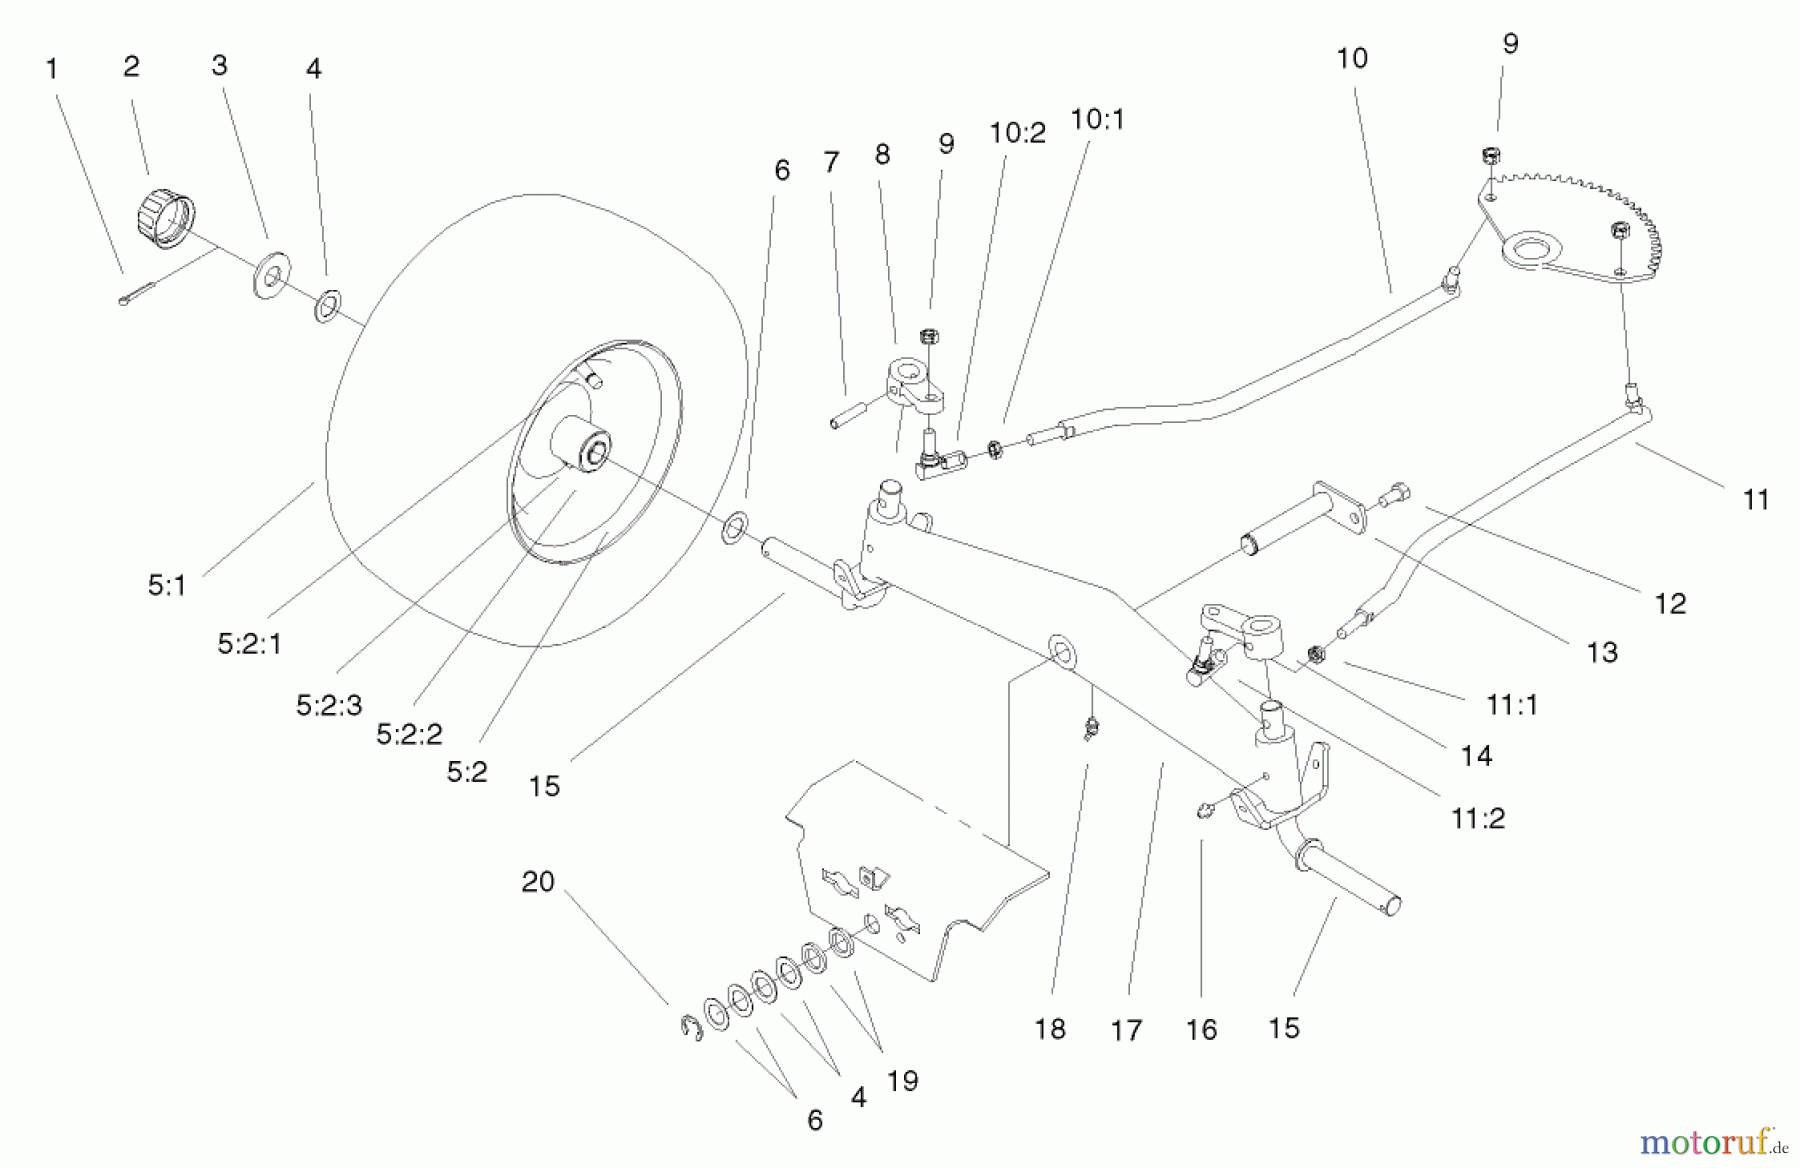  Toro Neu Mowers, Lawn & Garden Tractor Seite 1 72050 (265-H) - Toro 265-H Lawn and Garden Tractor, 2000 (200000001-200999999) FRONT AXLE ASSEMBLY